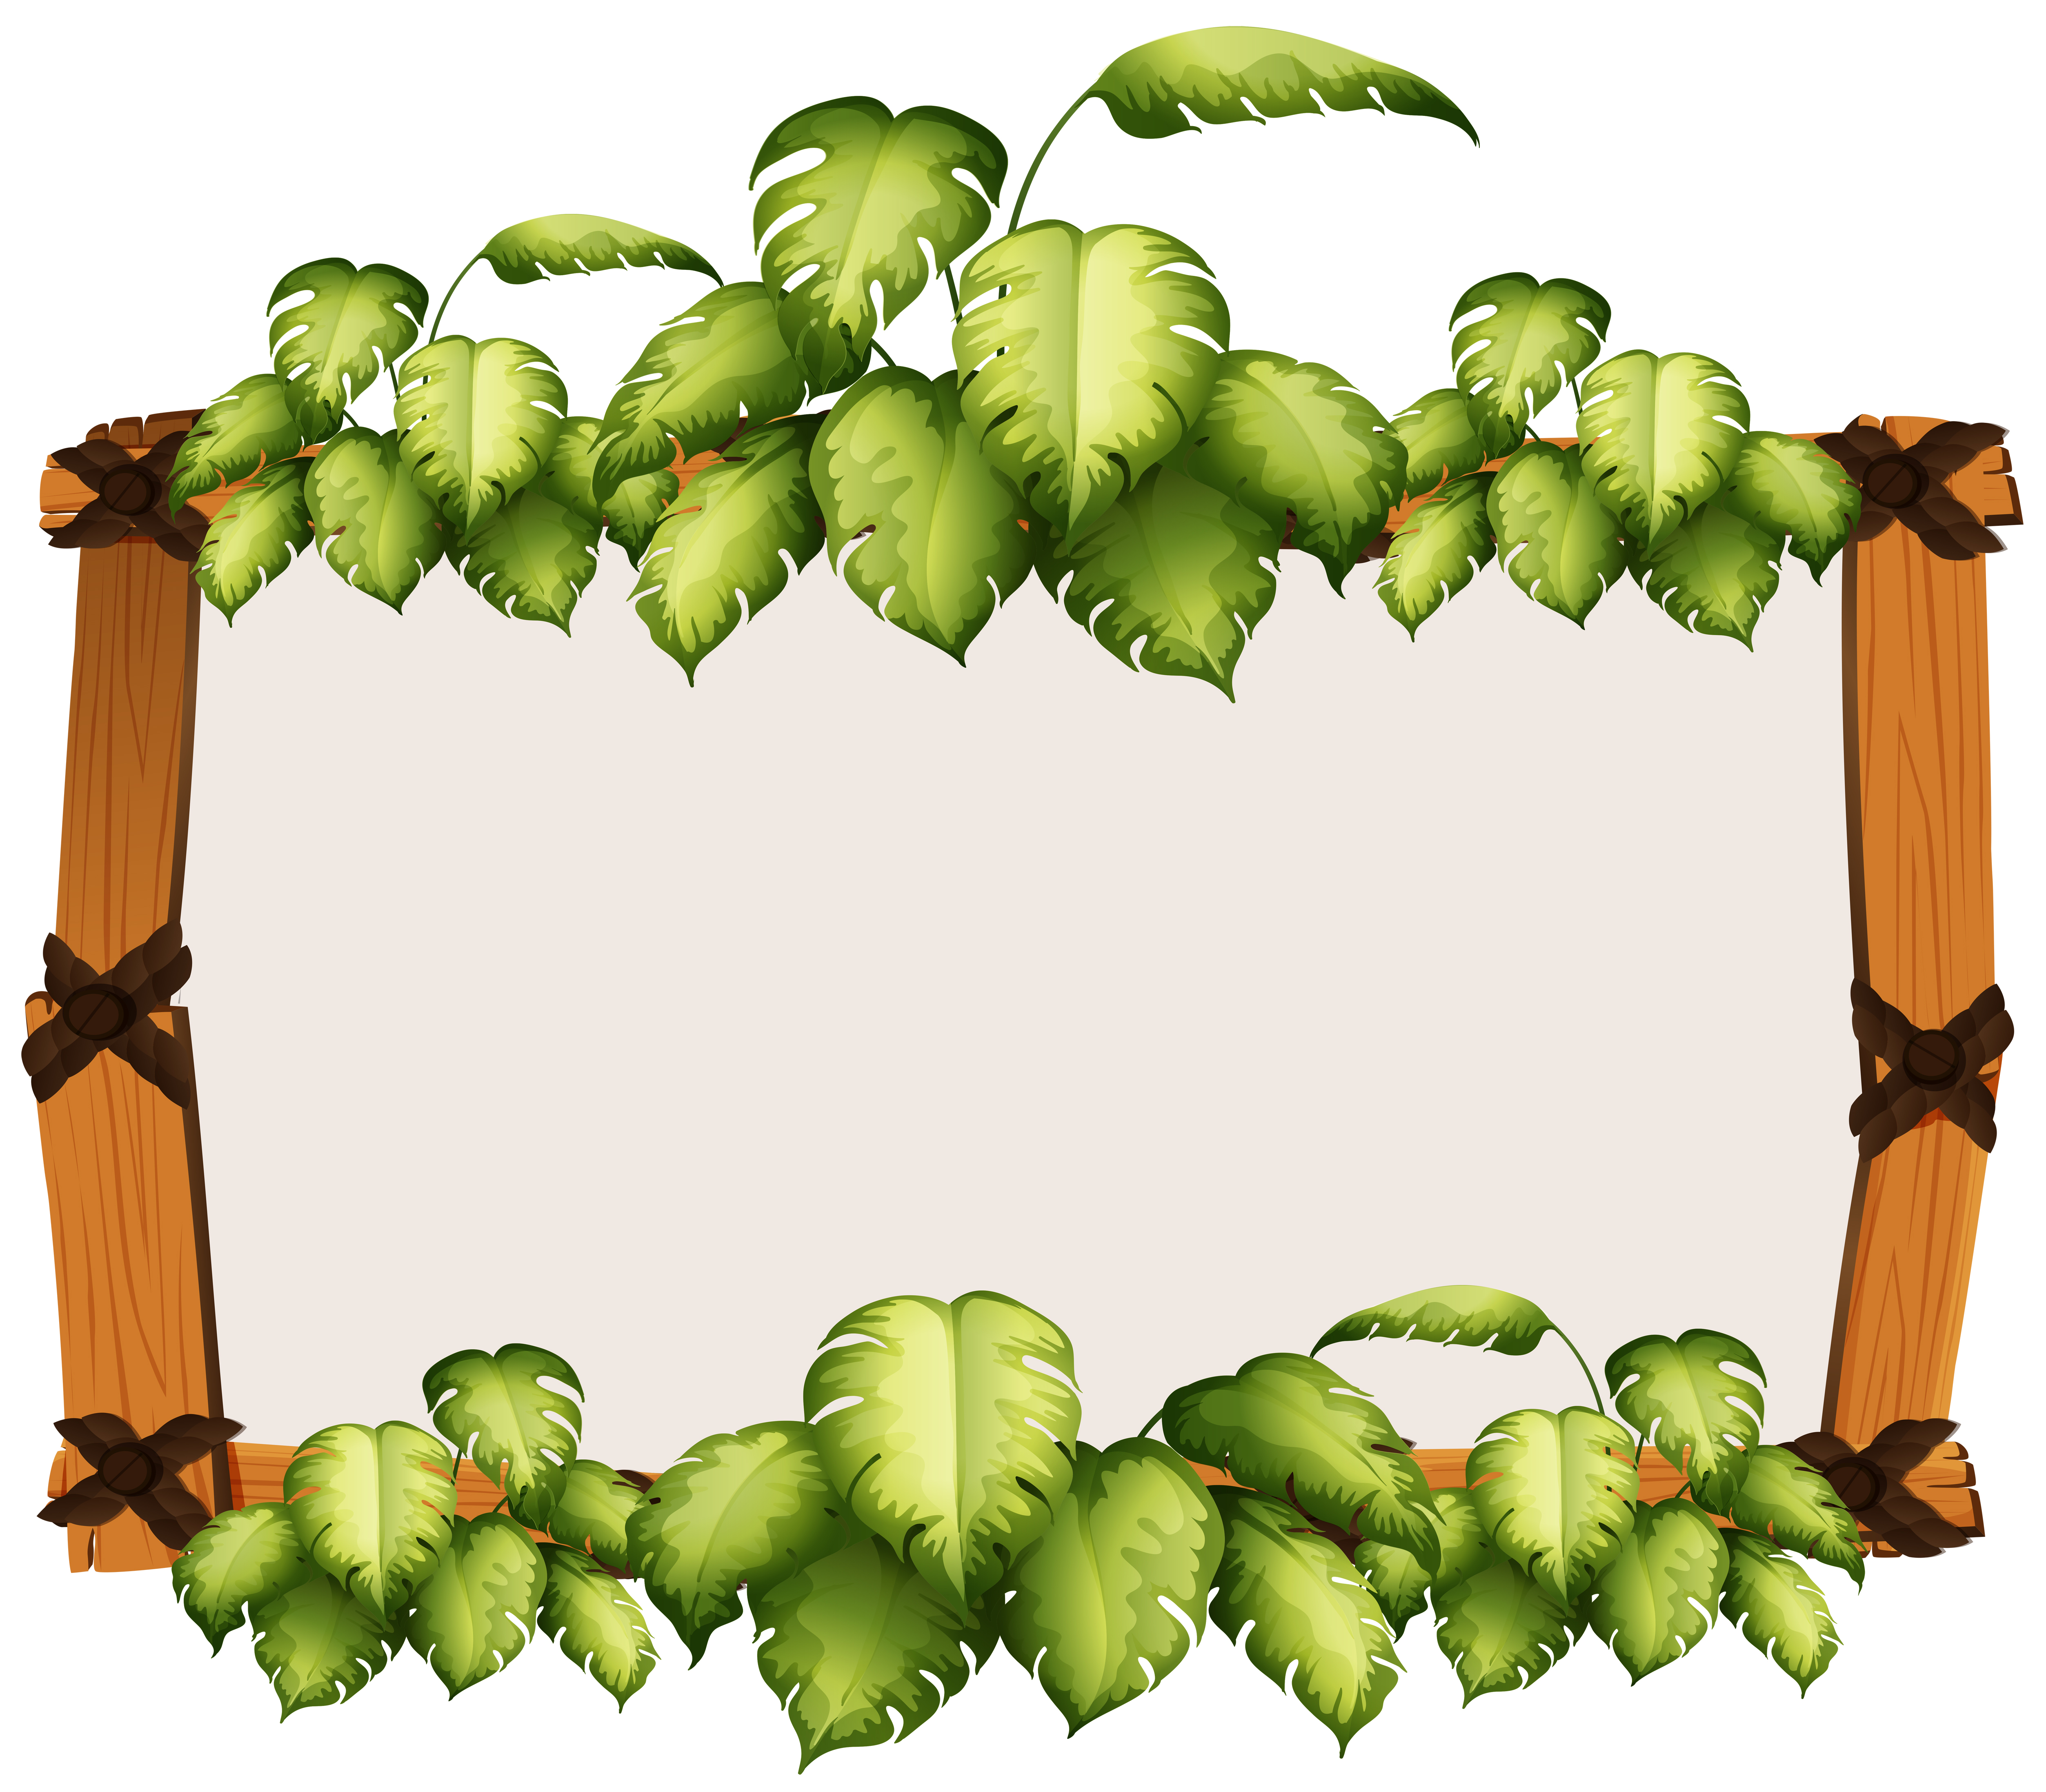 Download Borders With Leaves : Leaf Frames Foliage Borders ...